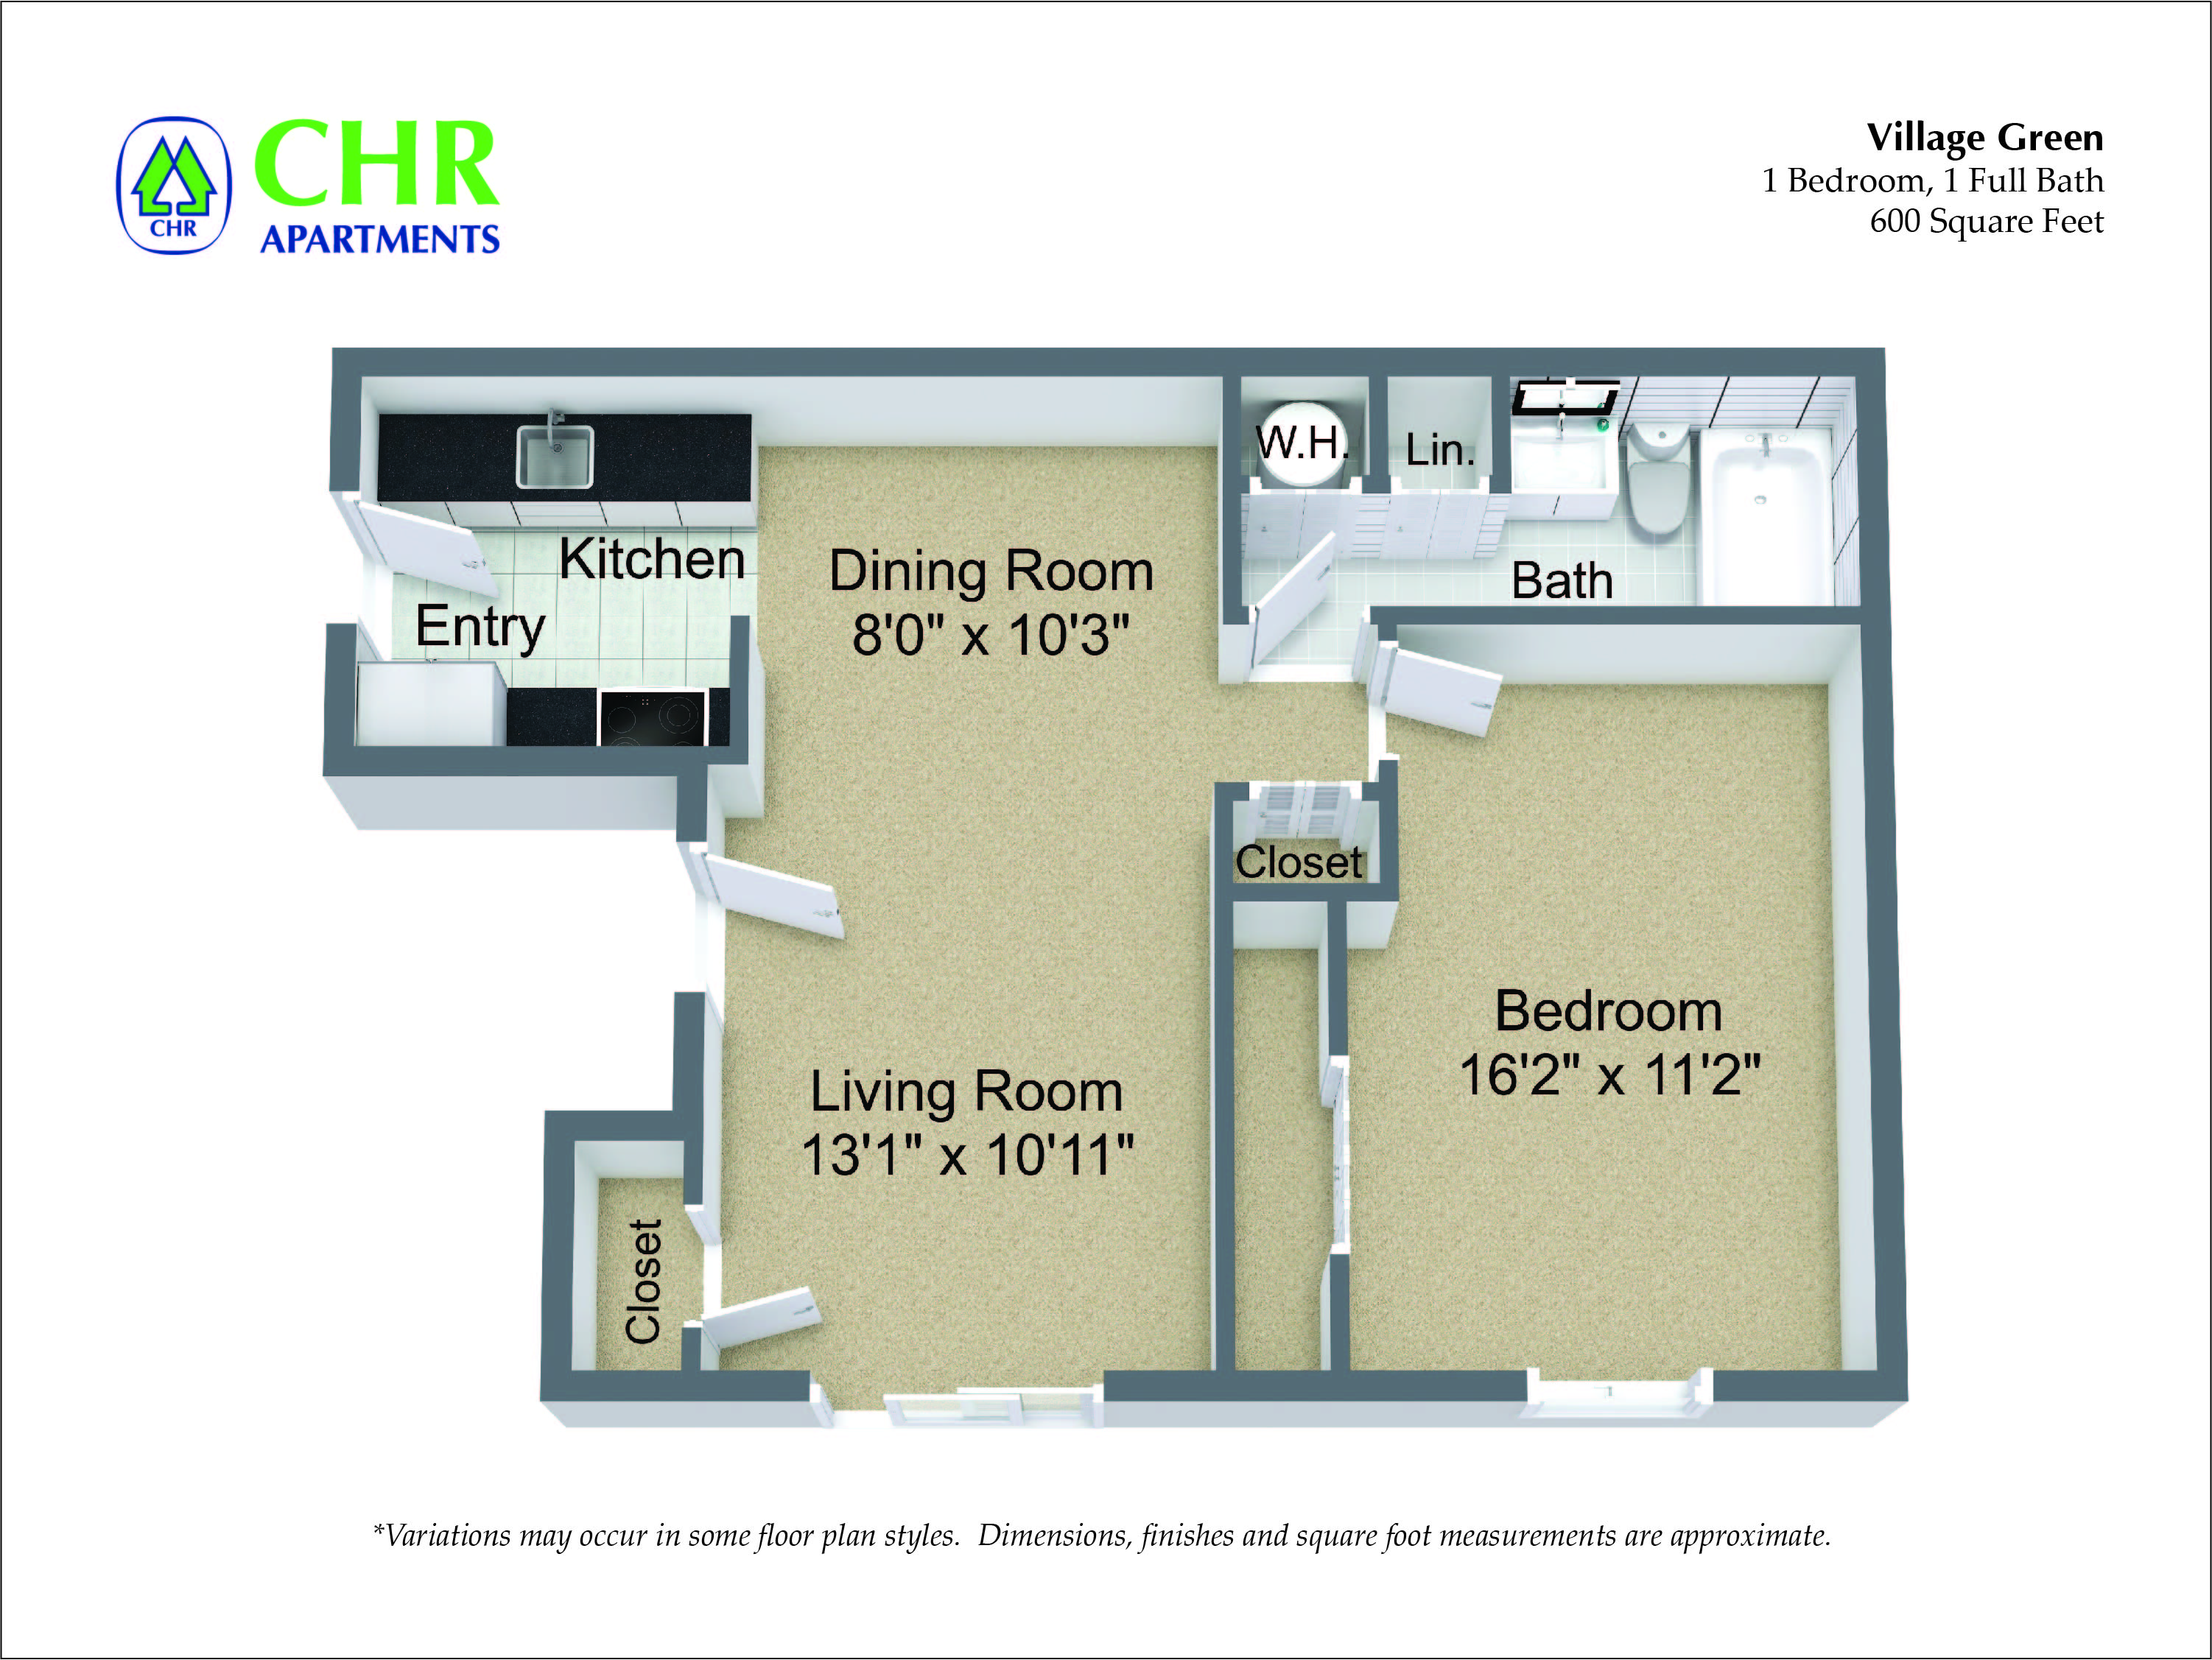 Click to view 1 Bed/1 Bath with Dining Area floor plan gallery